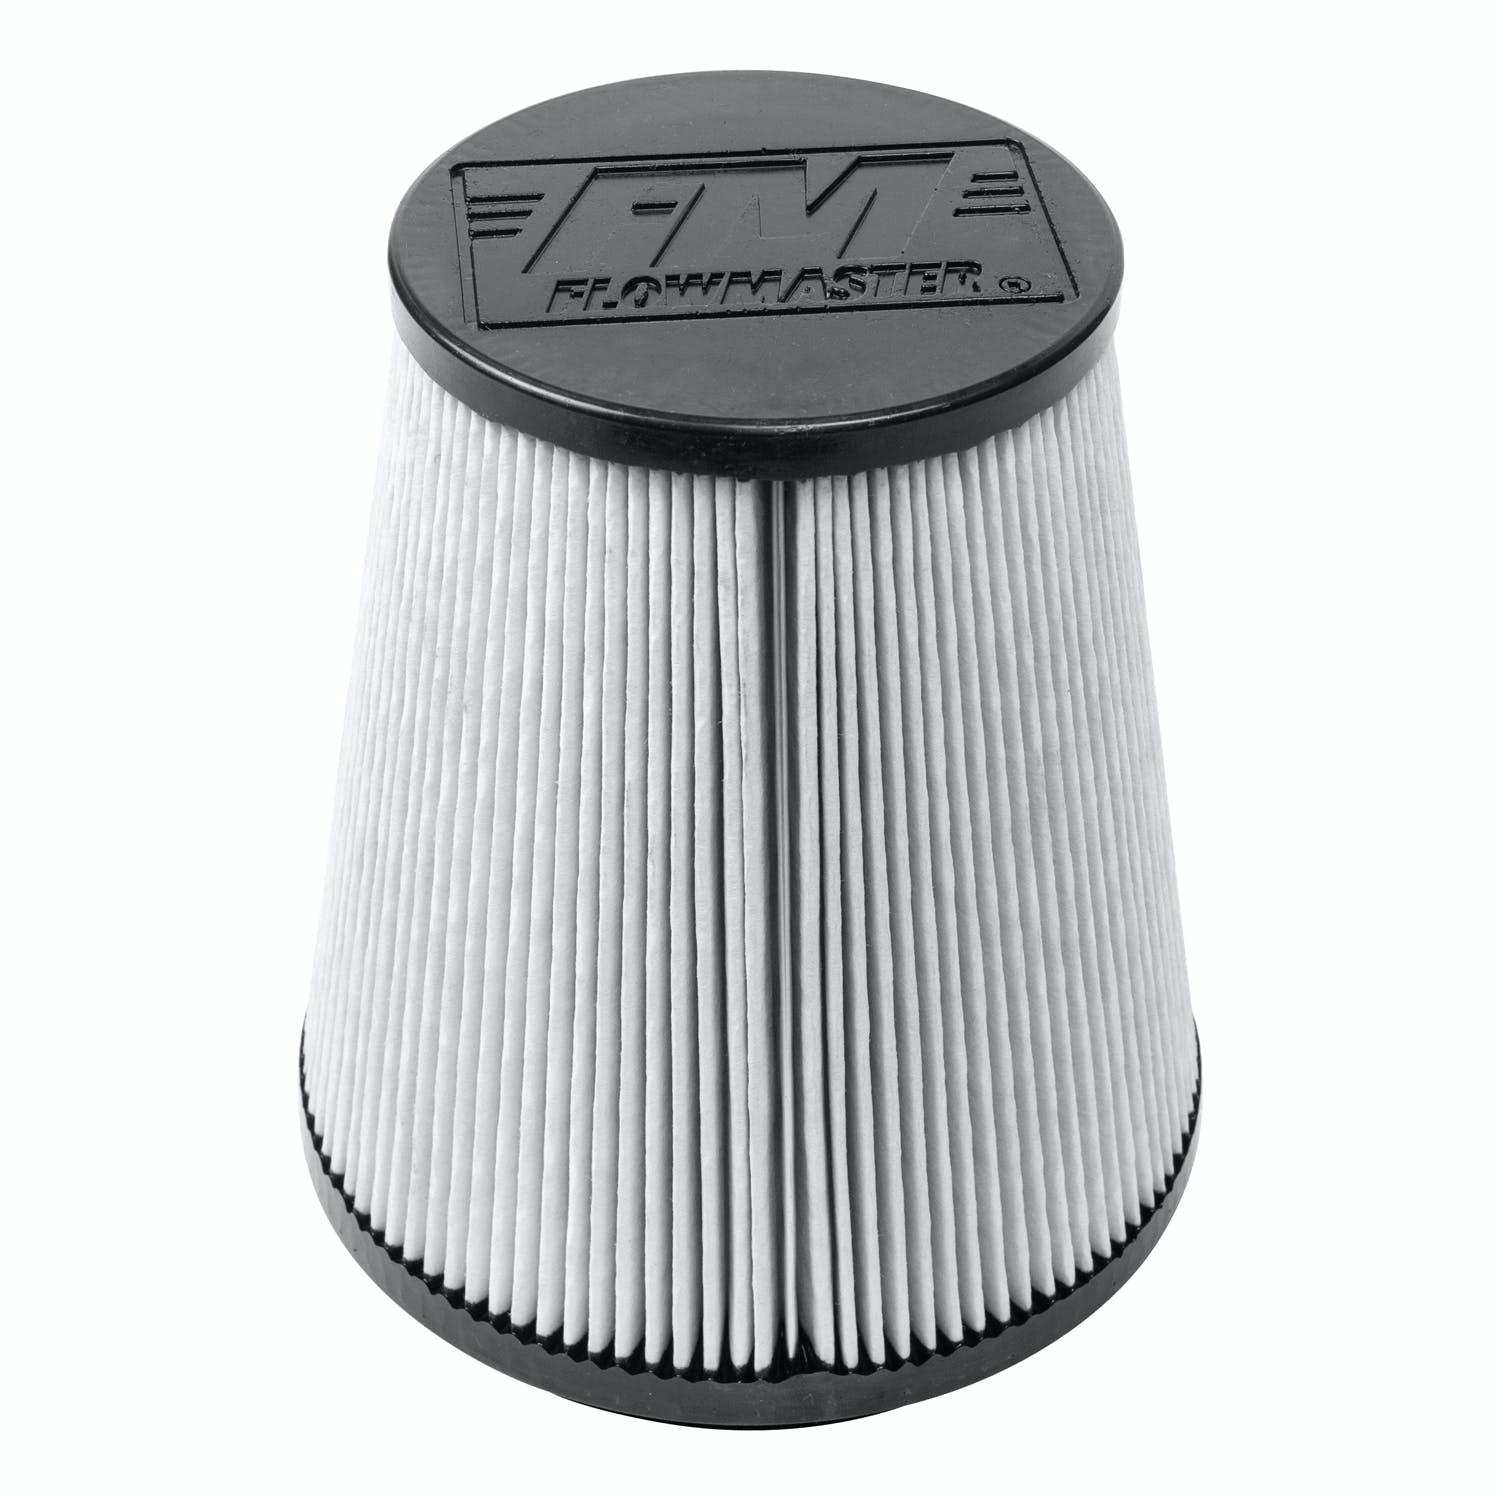 Flowmaster 615012D UNIVERSAL AIR FILTER, CONE, 6.0 IN x 8.6